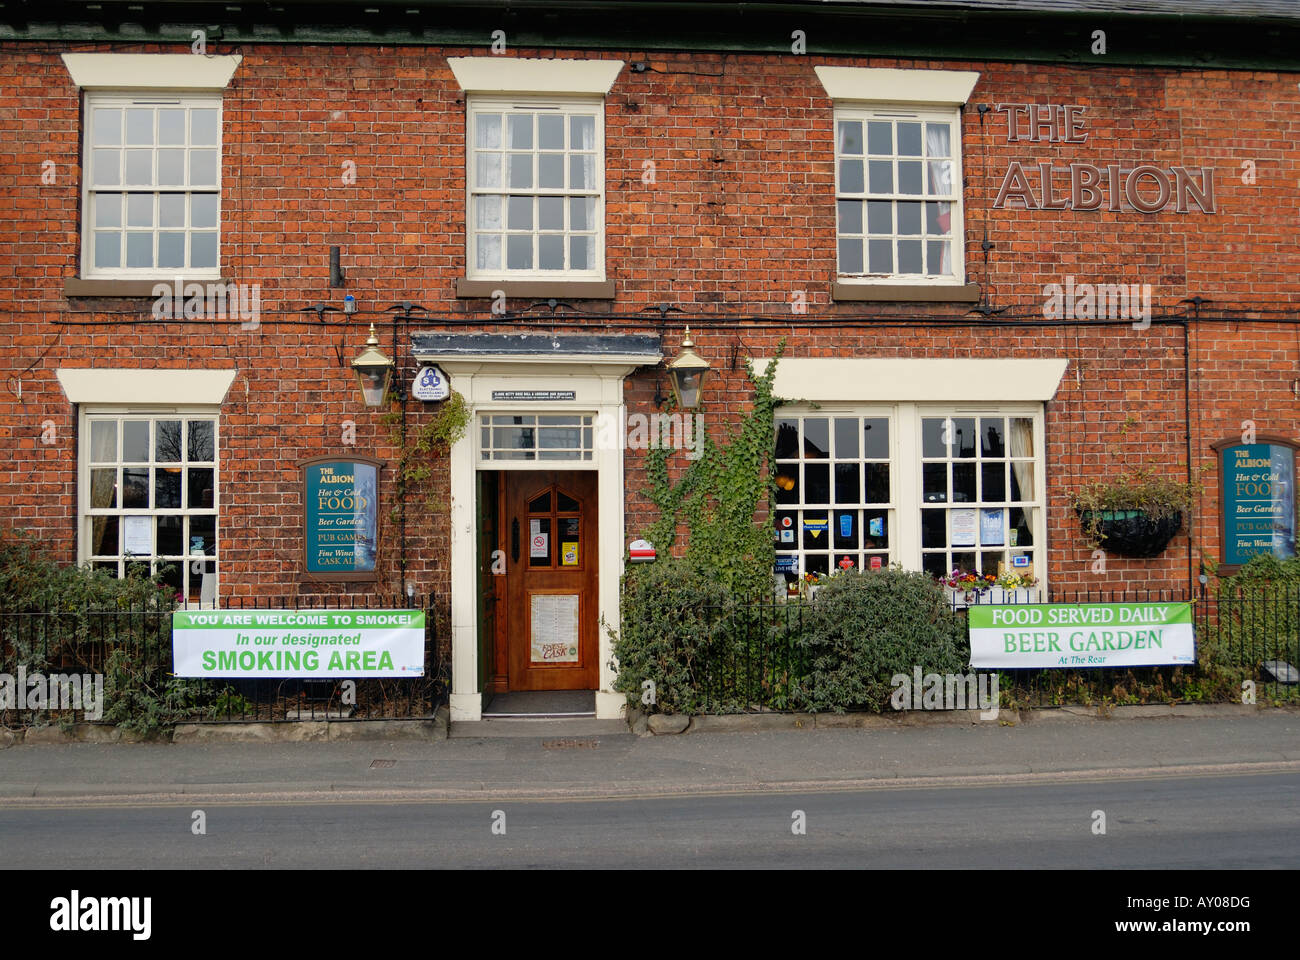 The Albion public house in Wem Shropshire with banners advertising a smoking area. Stock Photo